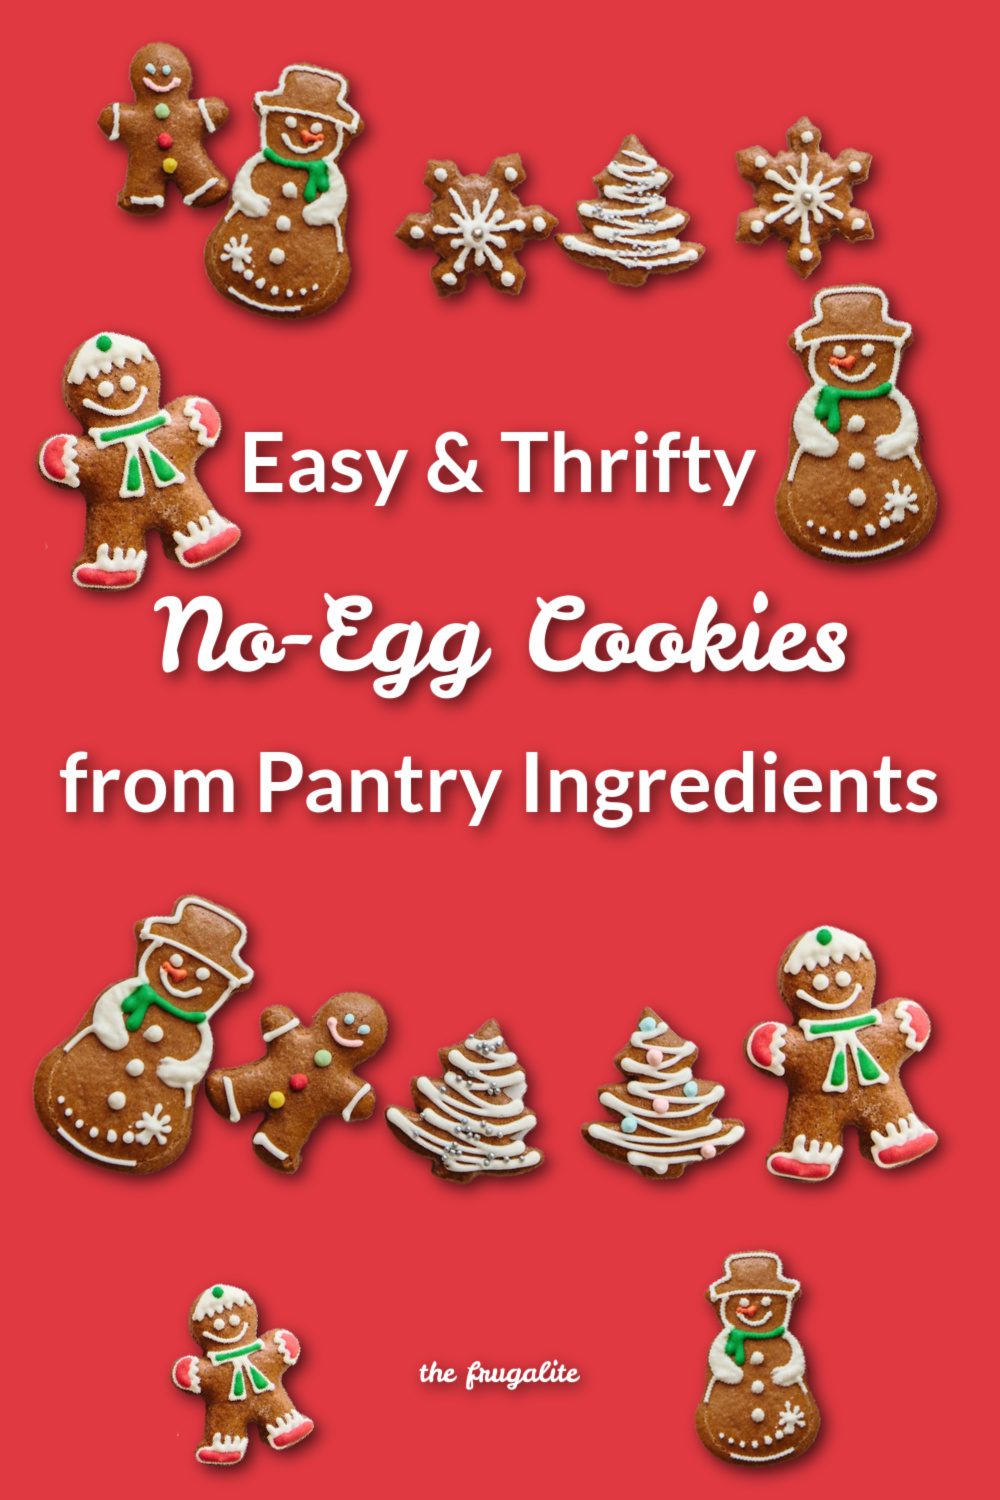 Easy, Thrifty Holiday Cookies from Pantry Ingredients